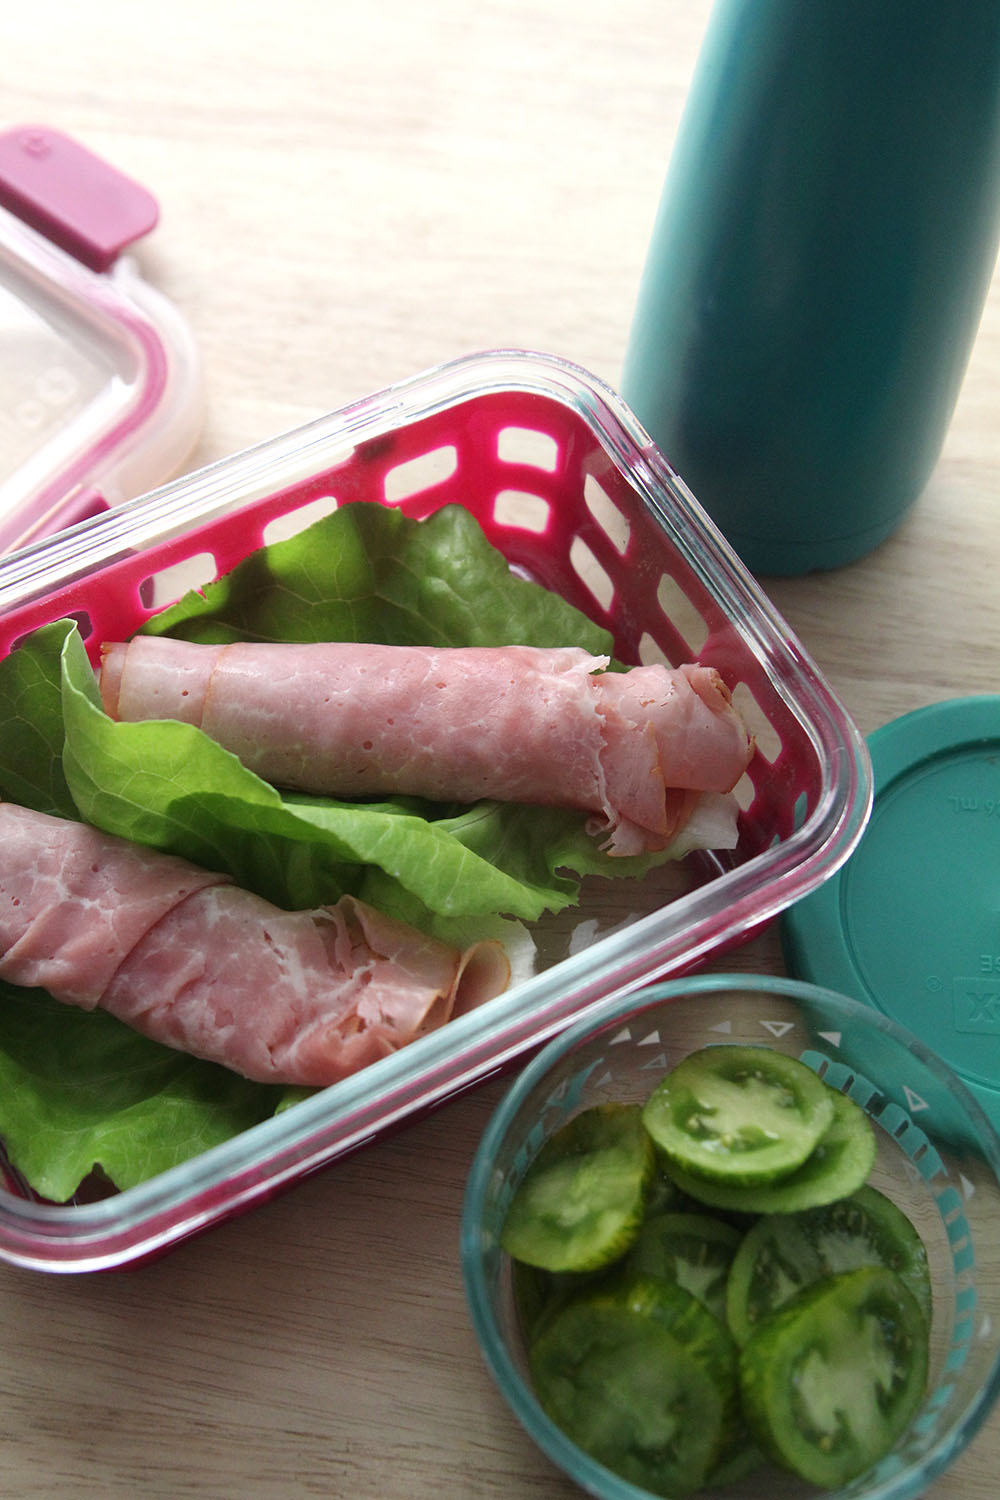 A glass container with two lettuce leaves topped with ham rolls is shown next to a glass container of green tomatoes, a water bottle and the container lids.